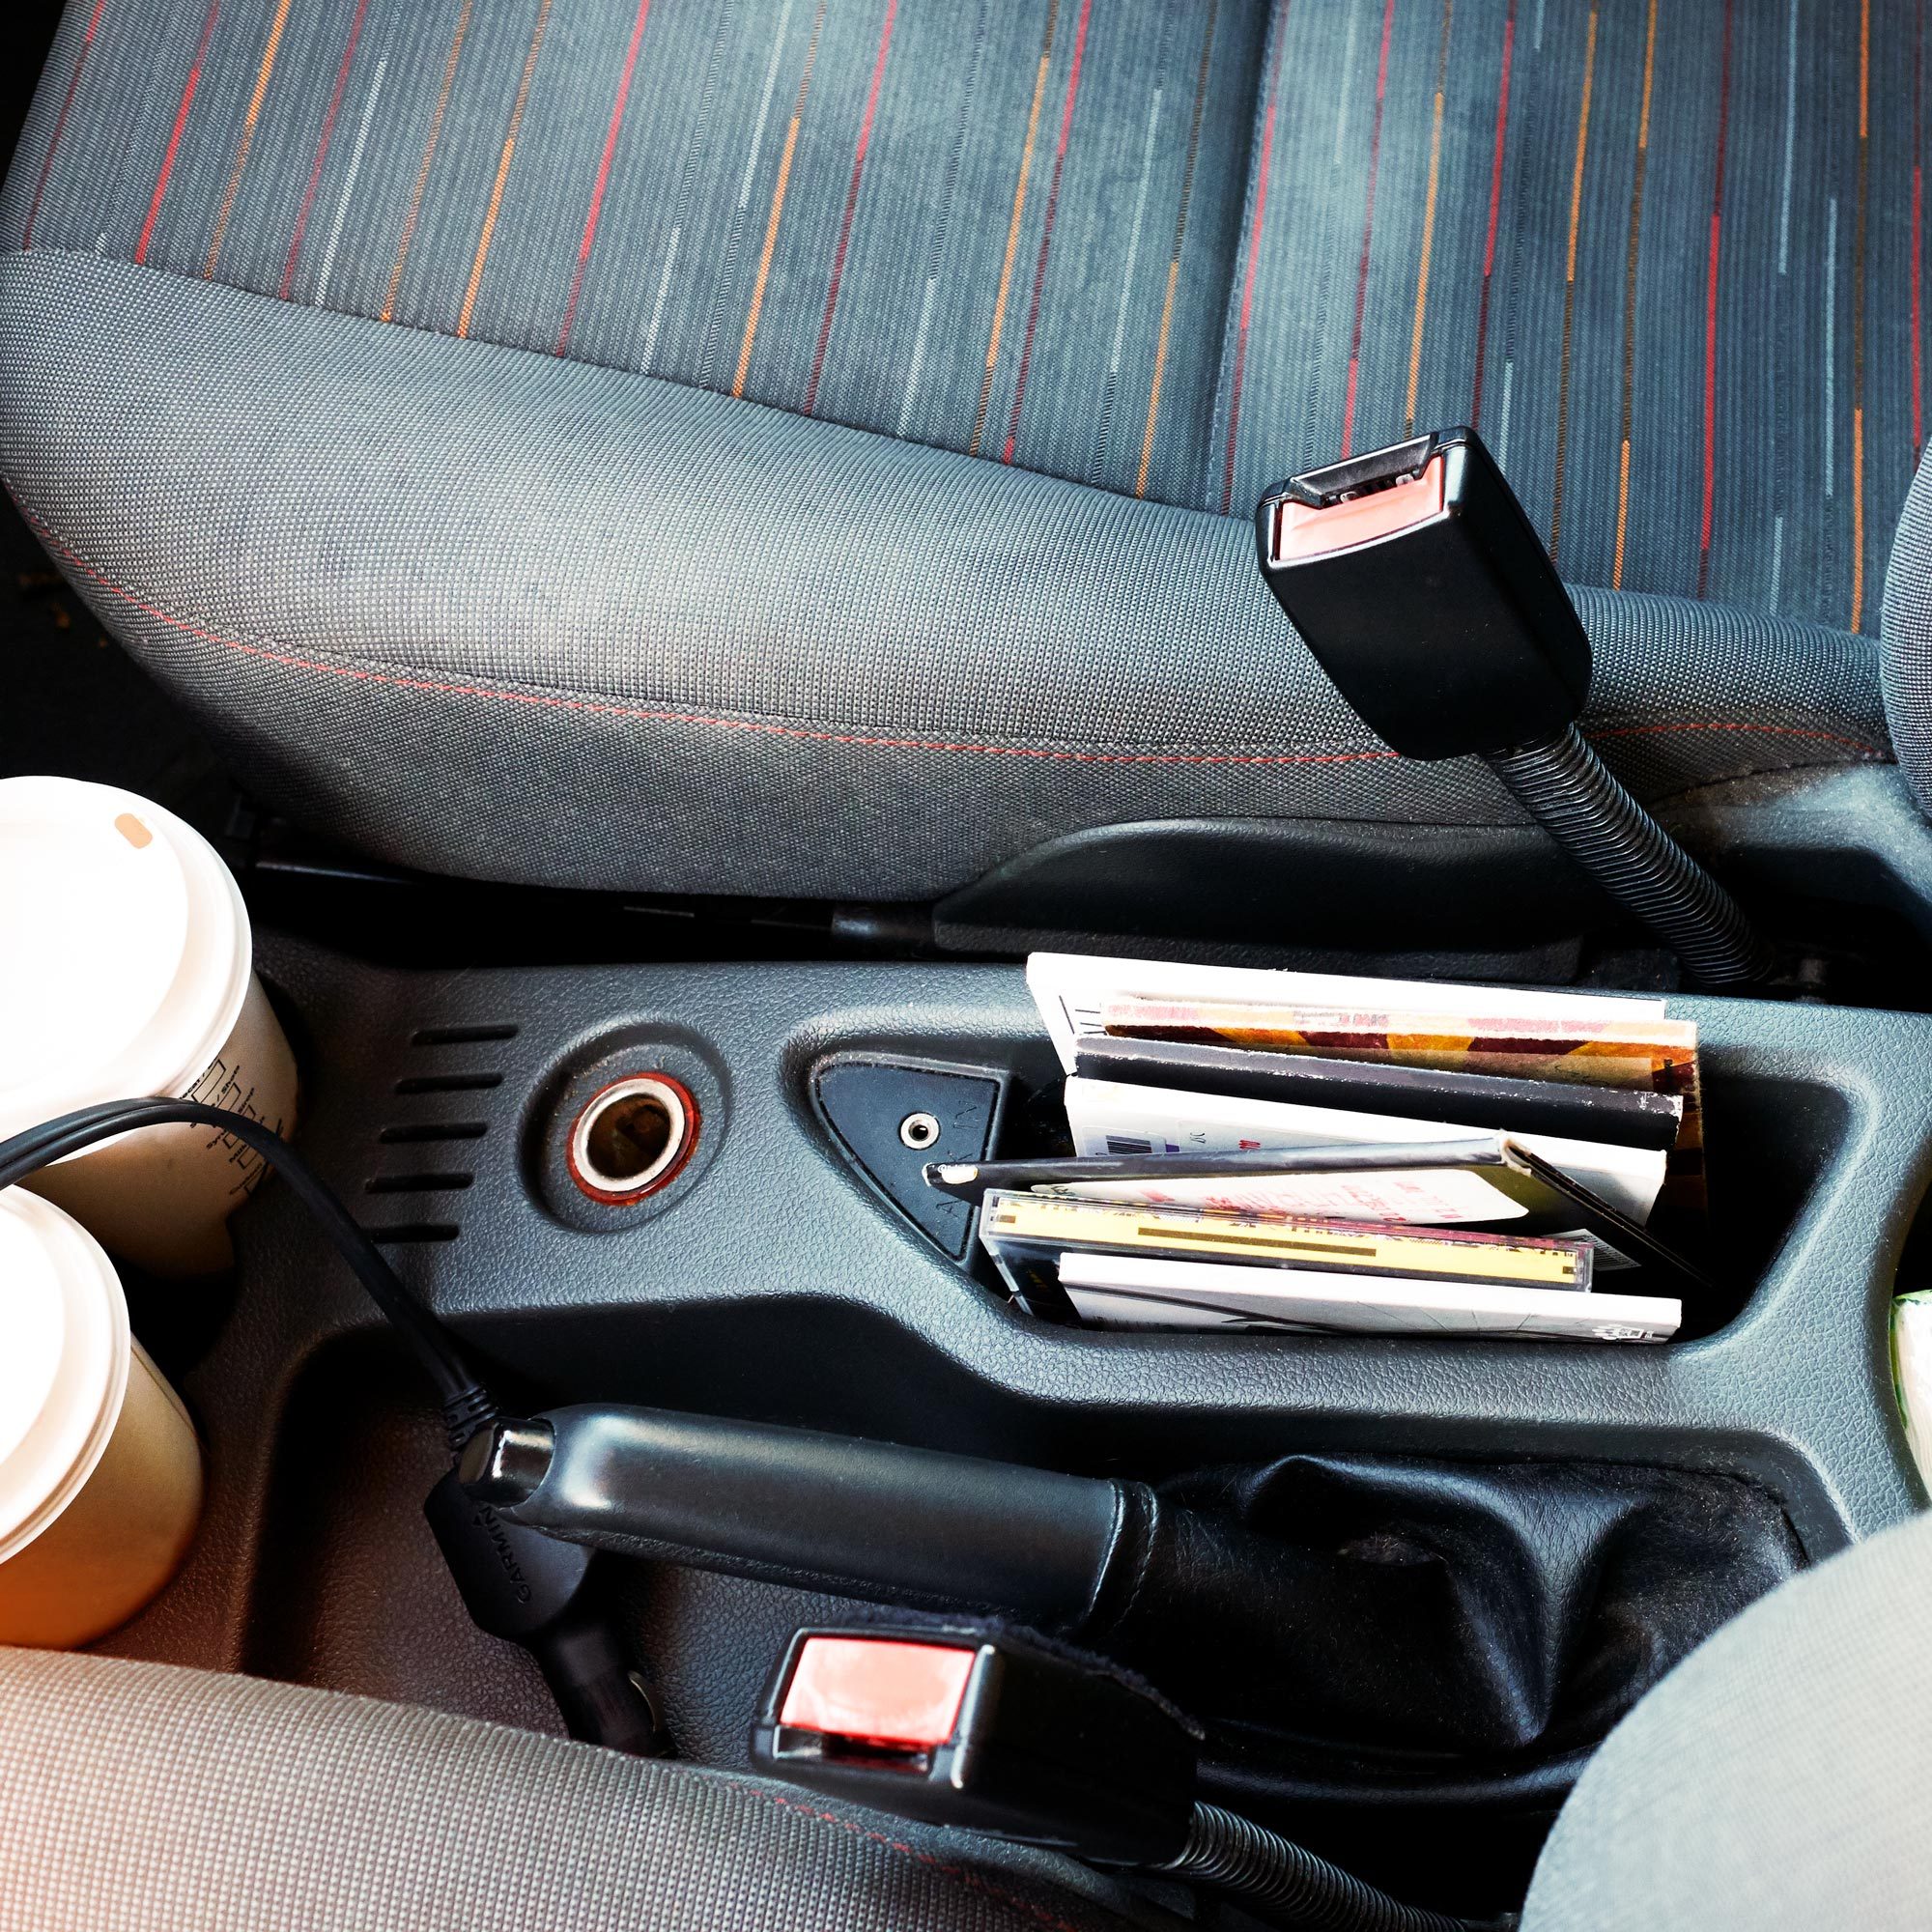 How to Properly Clean and Care for Your Vehicle's Interior